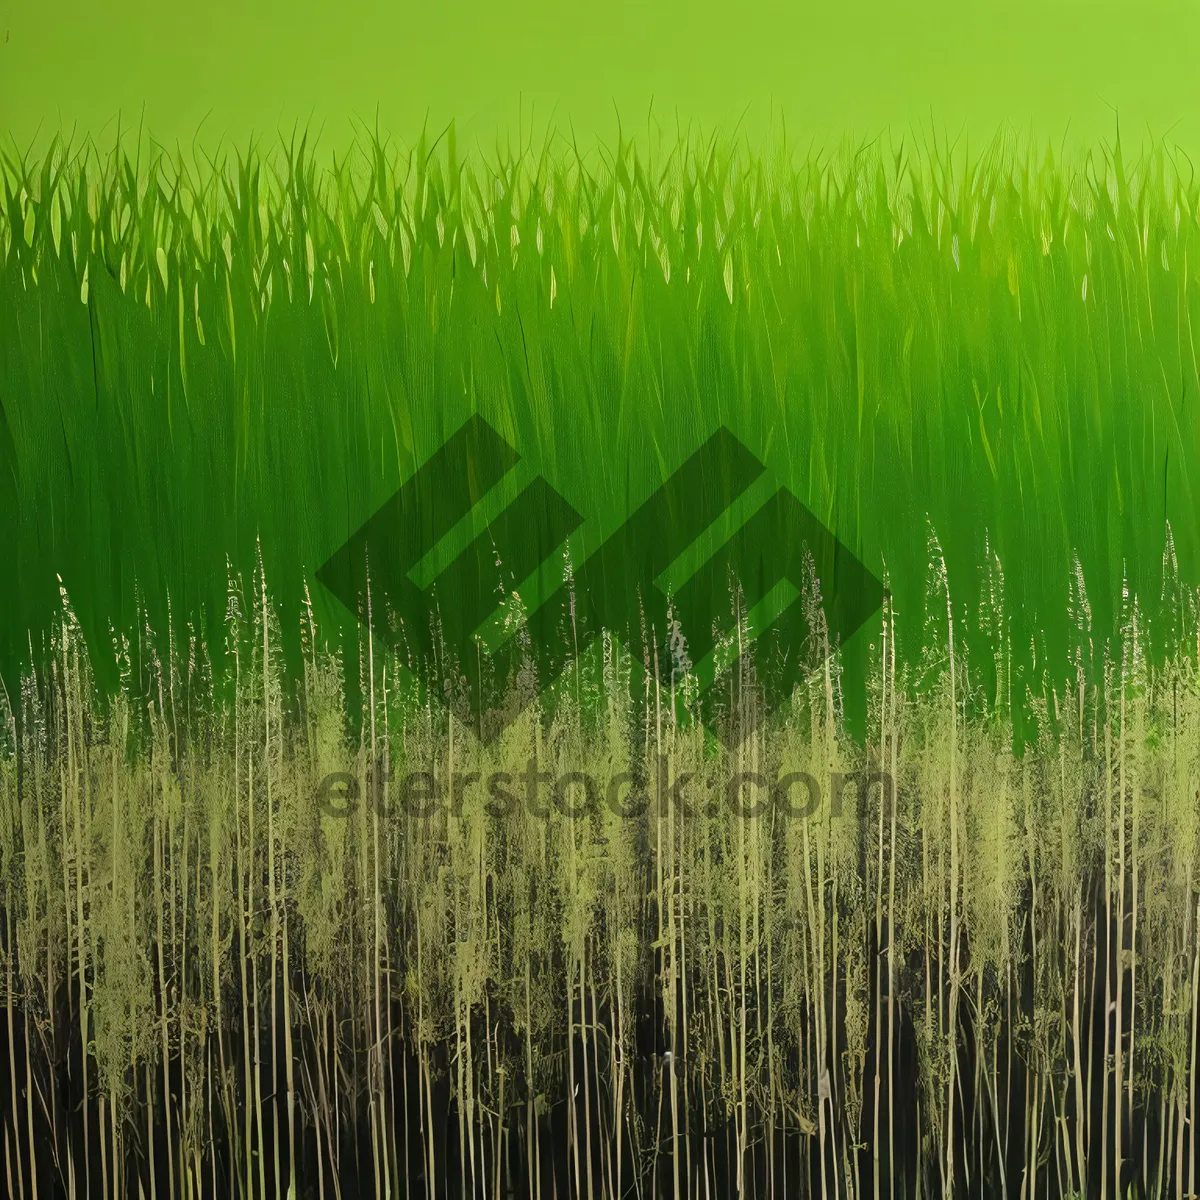 Picture of Rural Wheat Field in Summer: Lush Green Growth